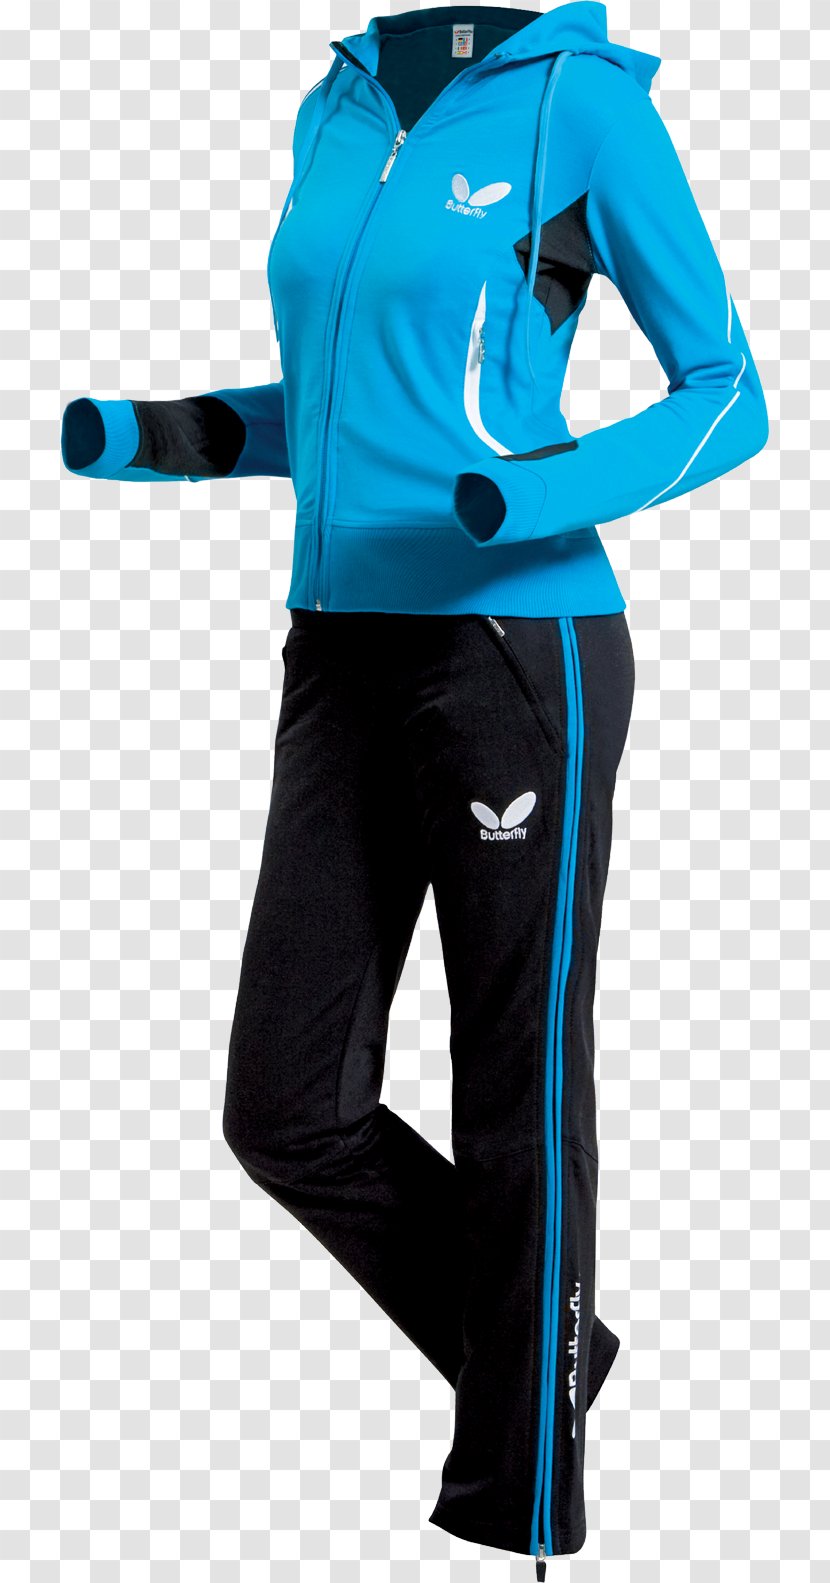 Hood Jacket Dry Suit Costume Sleeve - Turquoise Transparent PNG